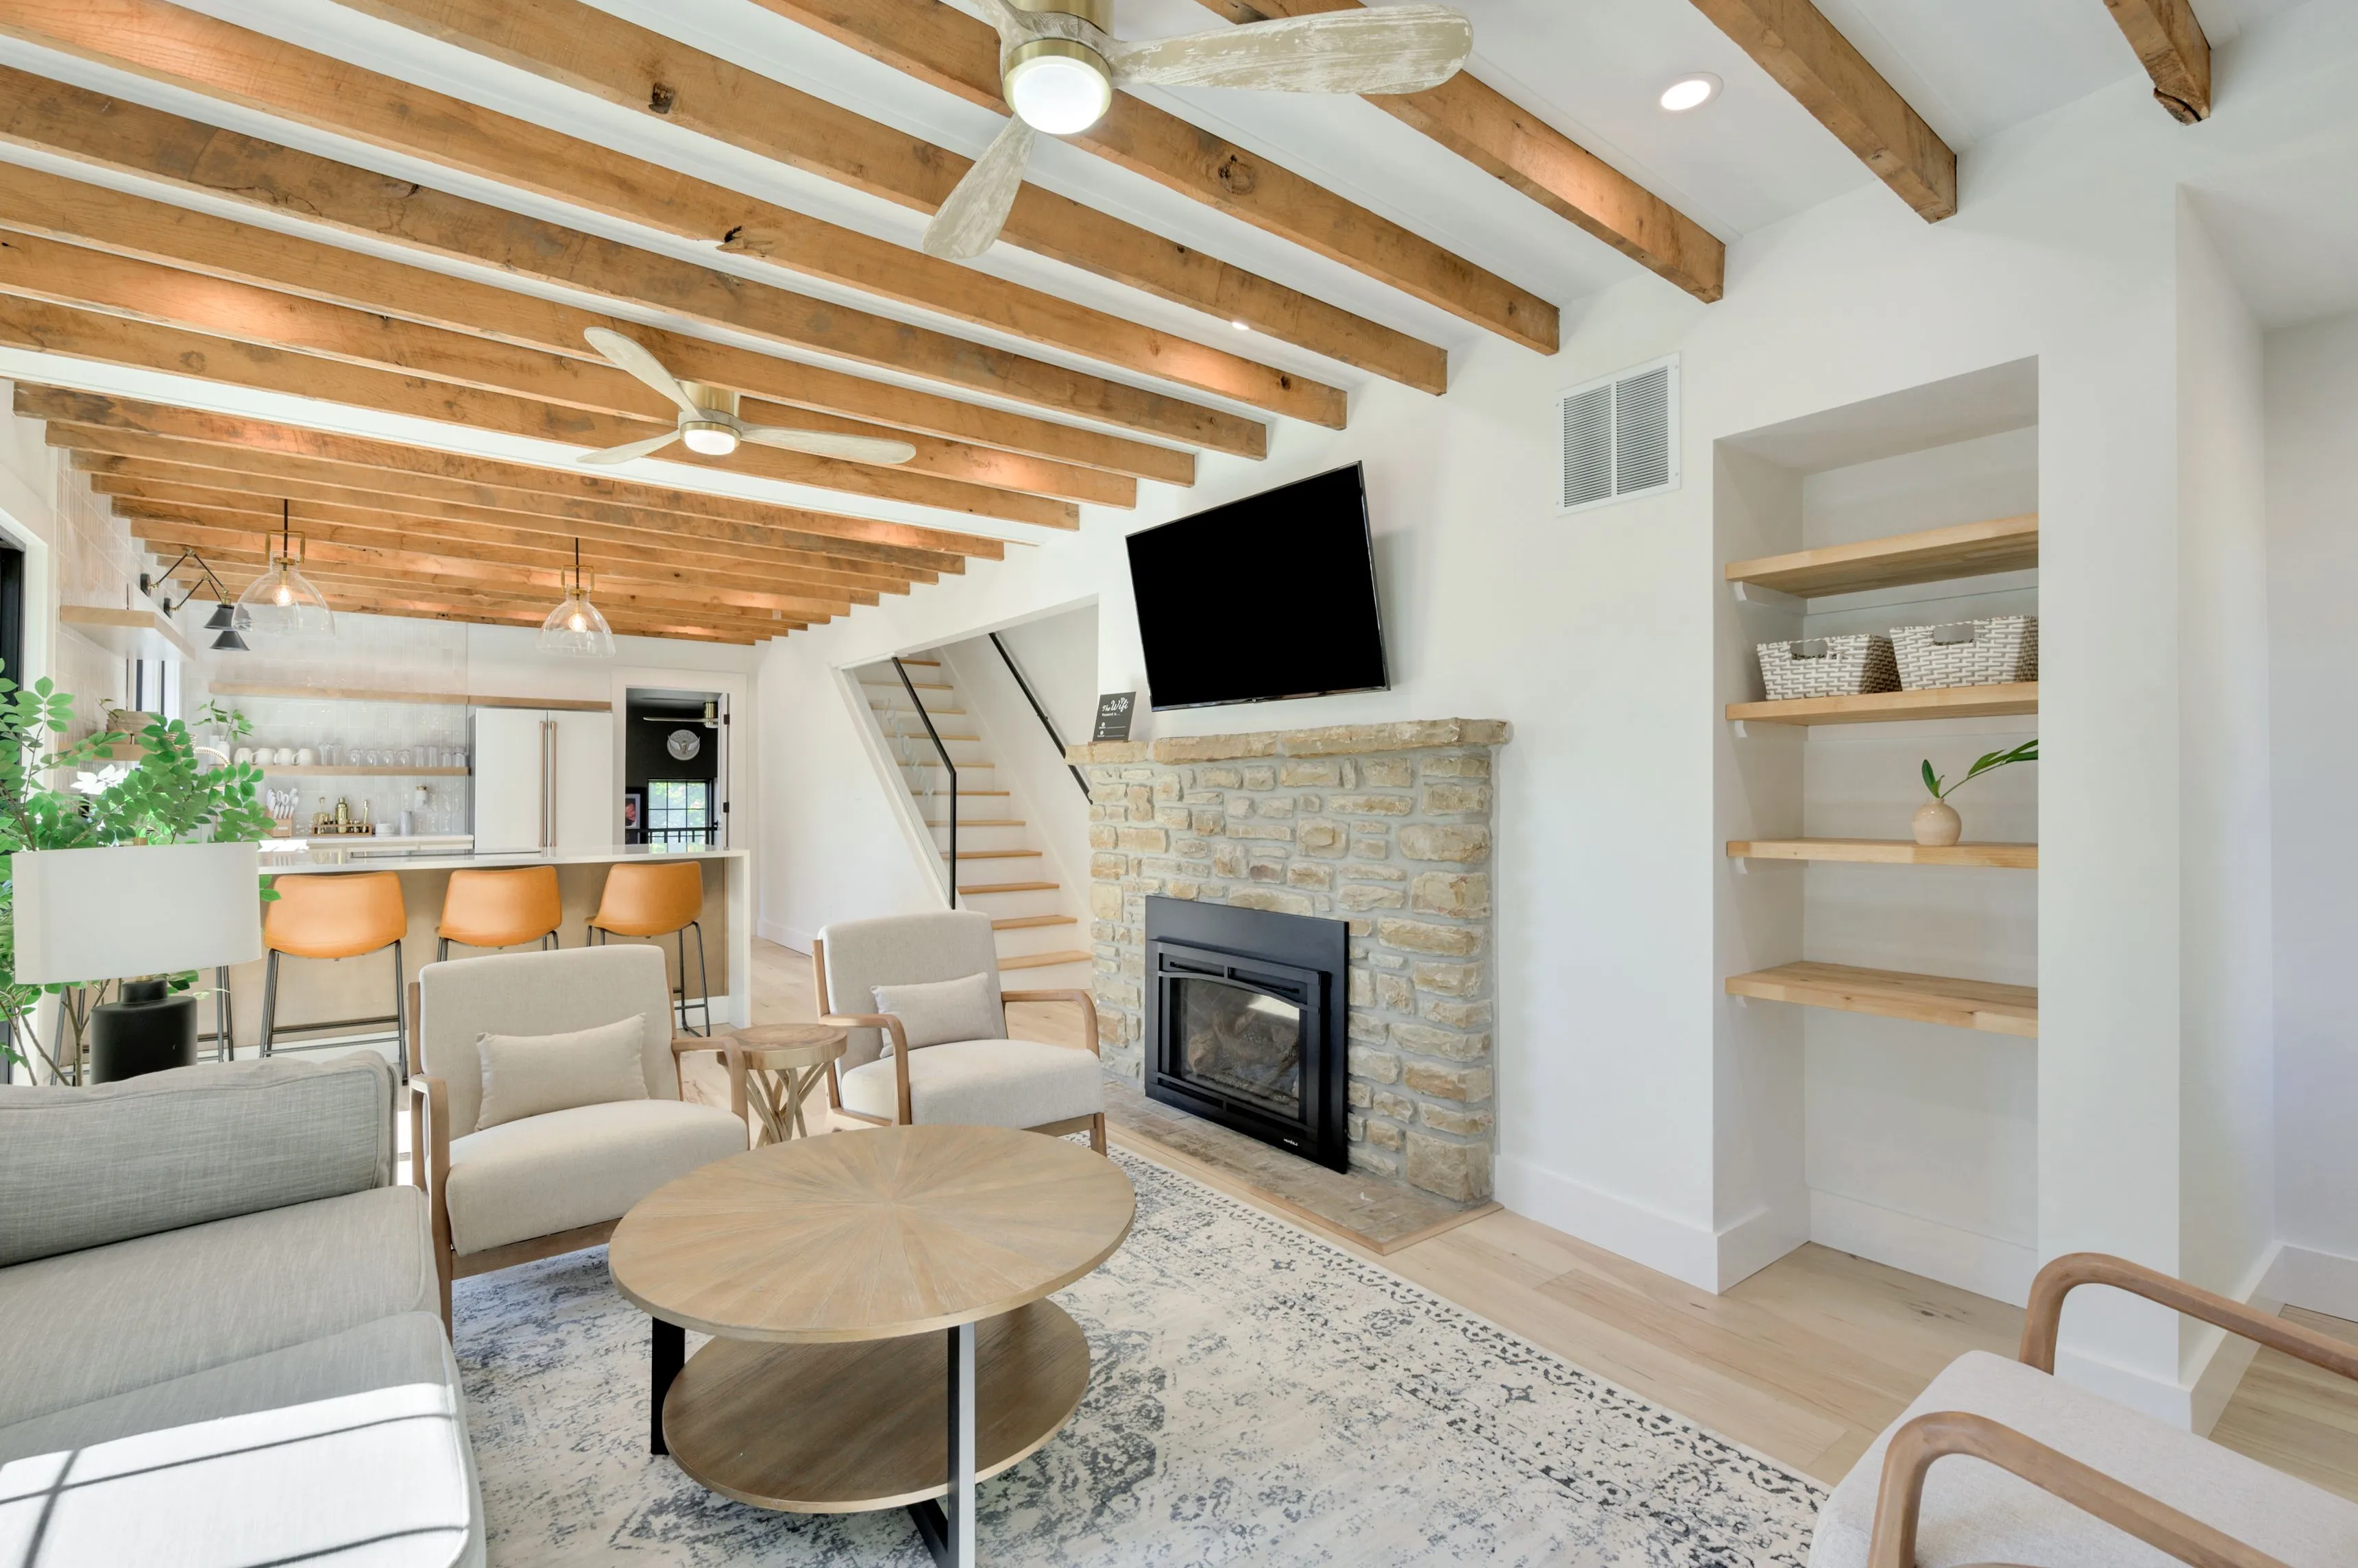 Modern living room with exposed wooden beams, a fireplace, built-in shelving, and a staircase leading to a loft.